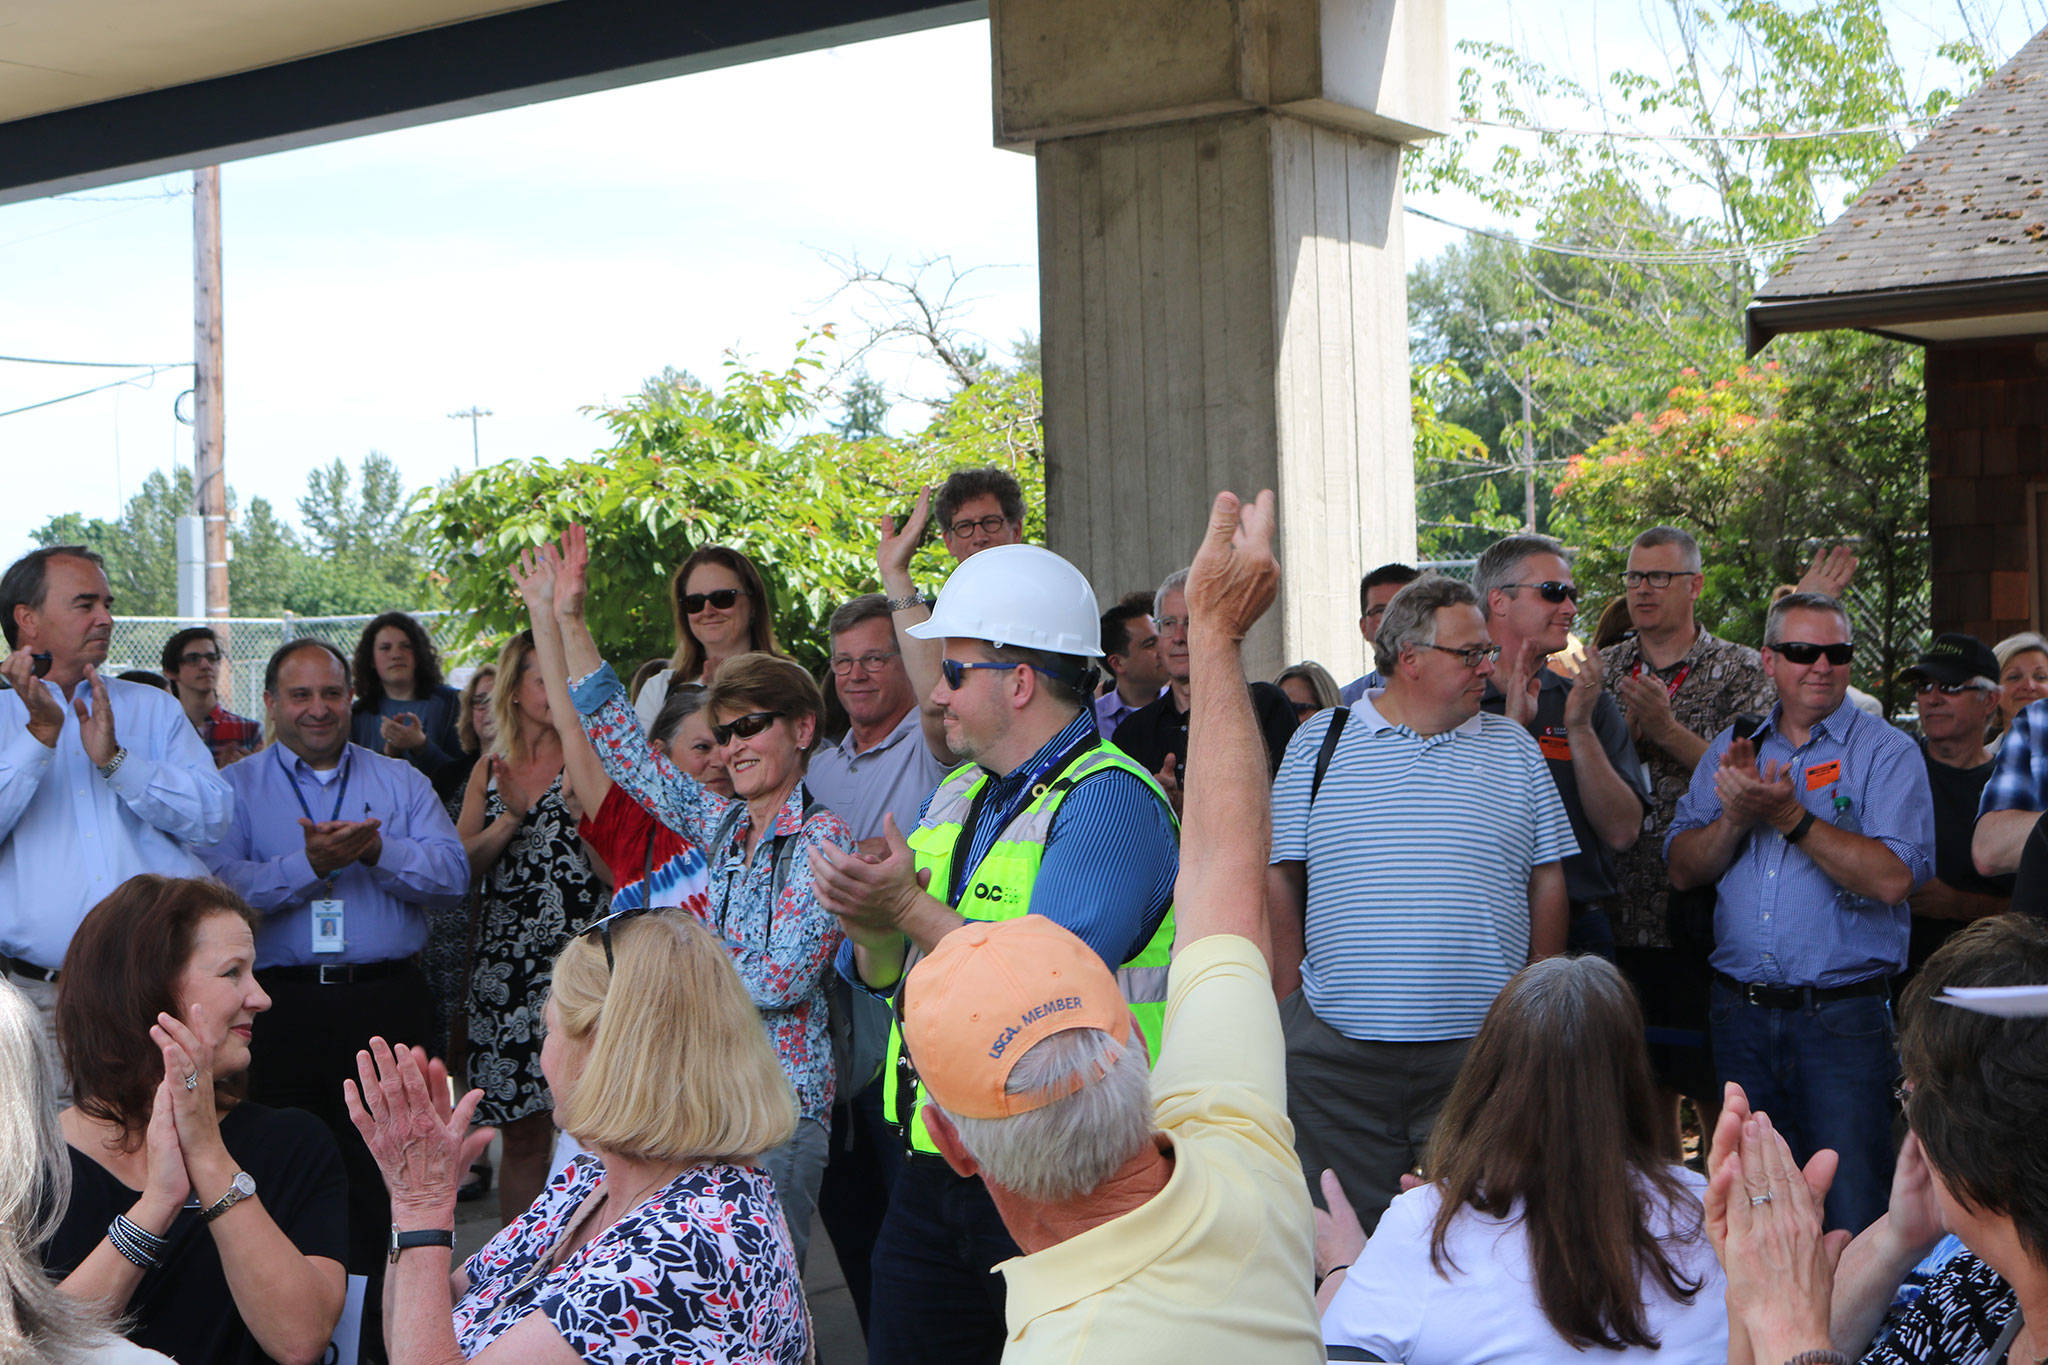 Dozens of people attend the groundbreaking ceremony. They were asked to raise their hands if they’re Juanita High School graduates. CATHERINE KRUMMEY / Kirkland Reporter